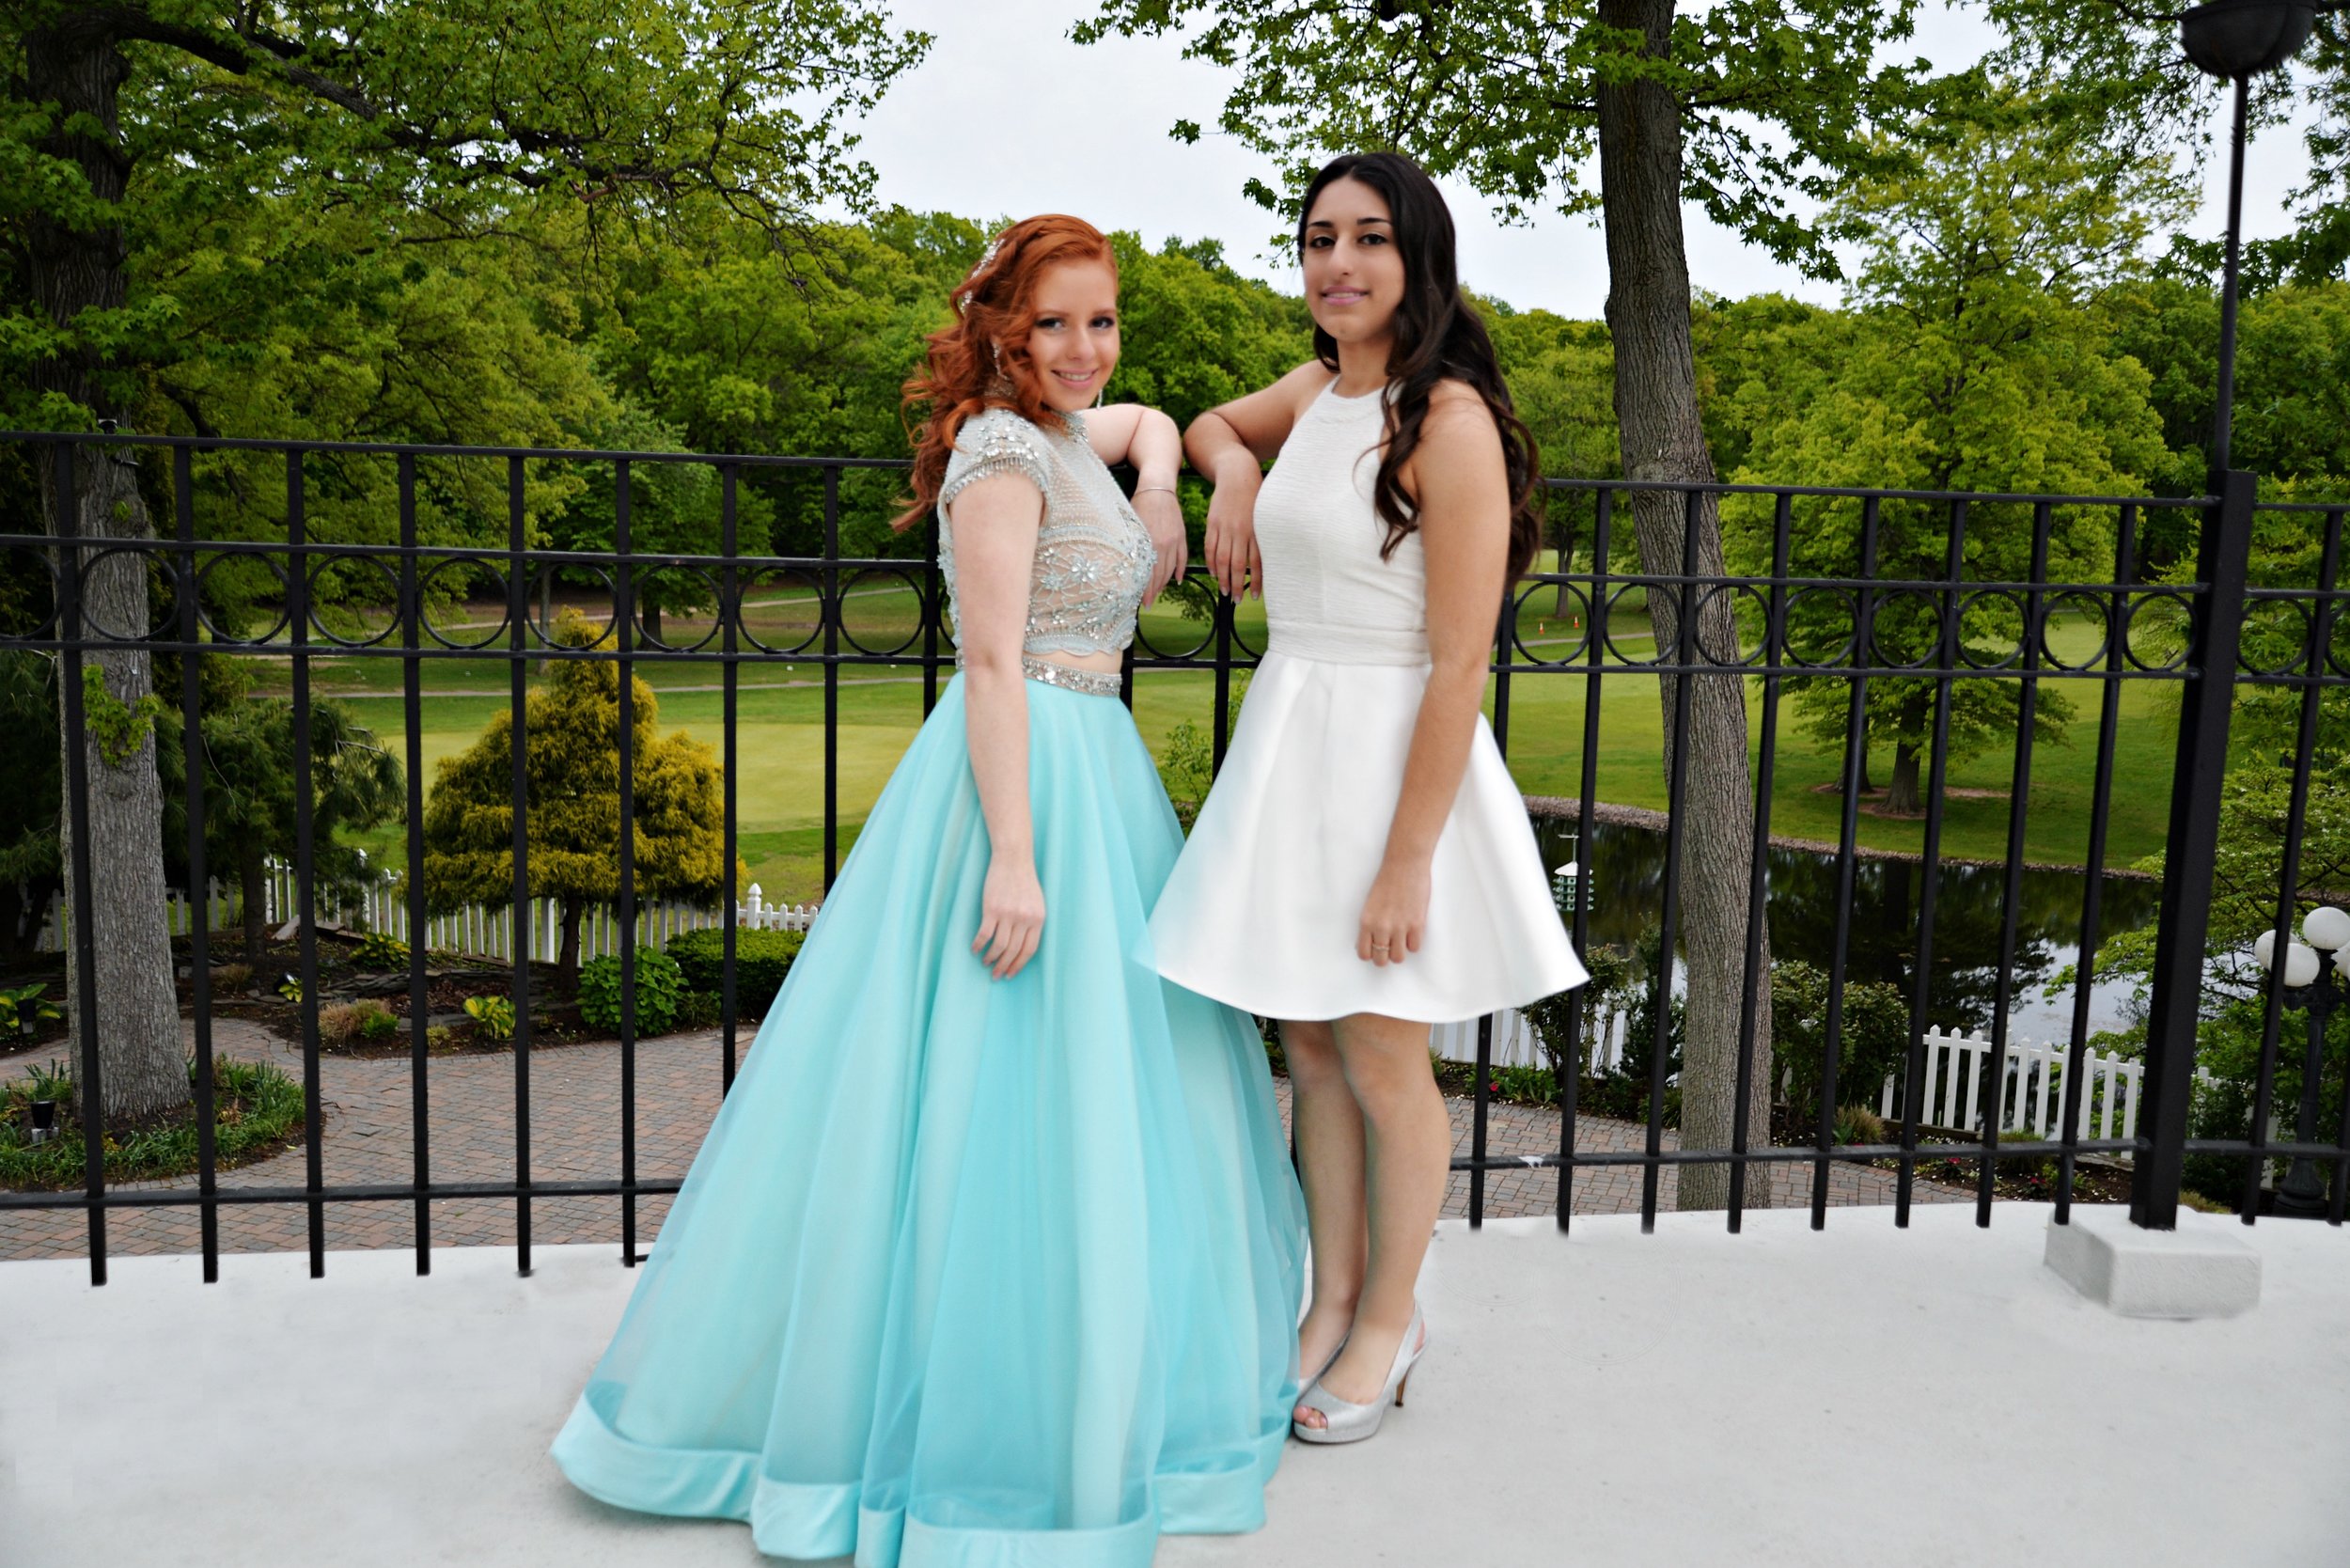 Prom hair and makeup staten island .jpg